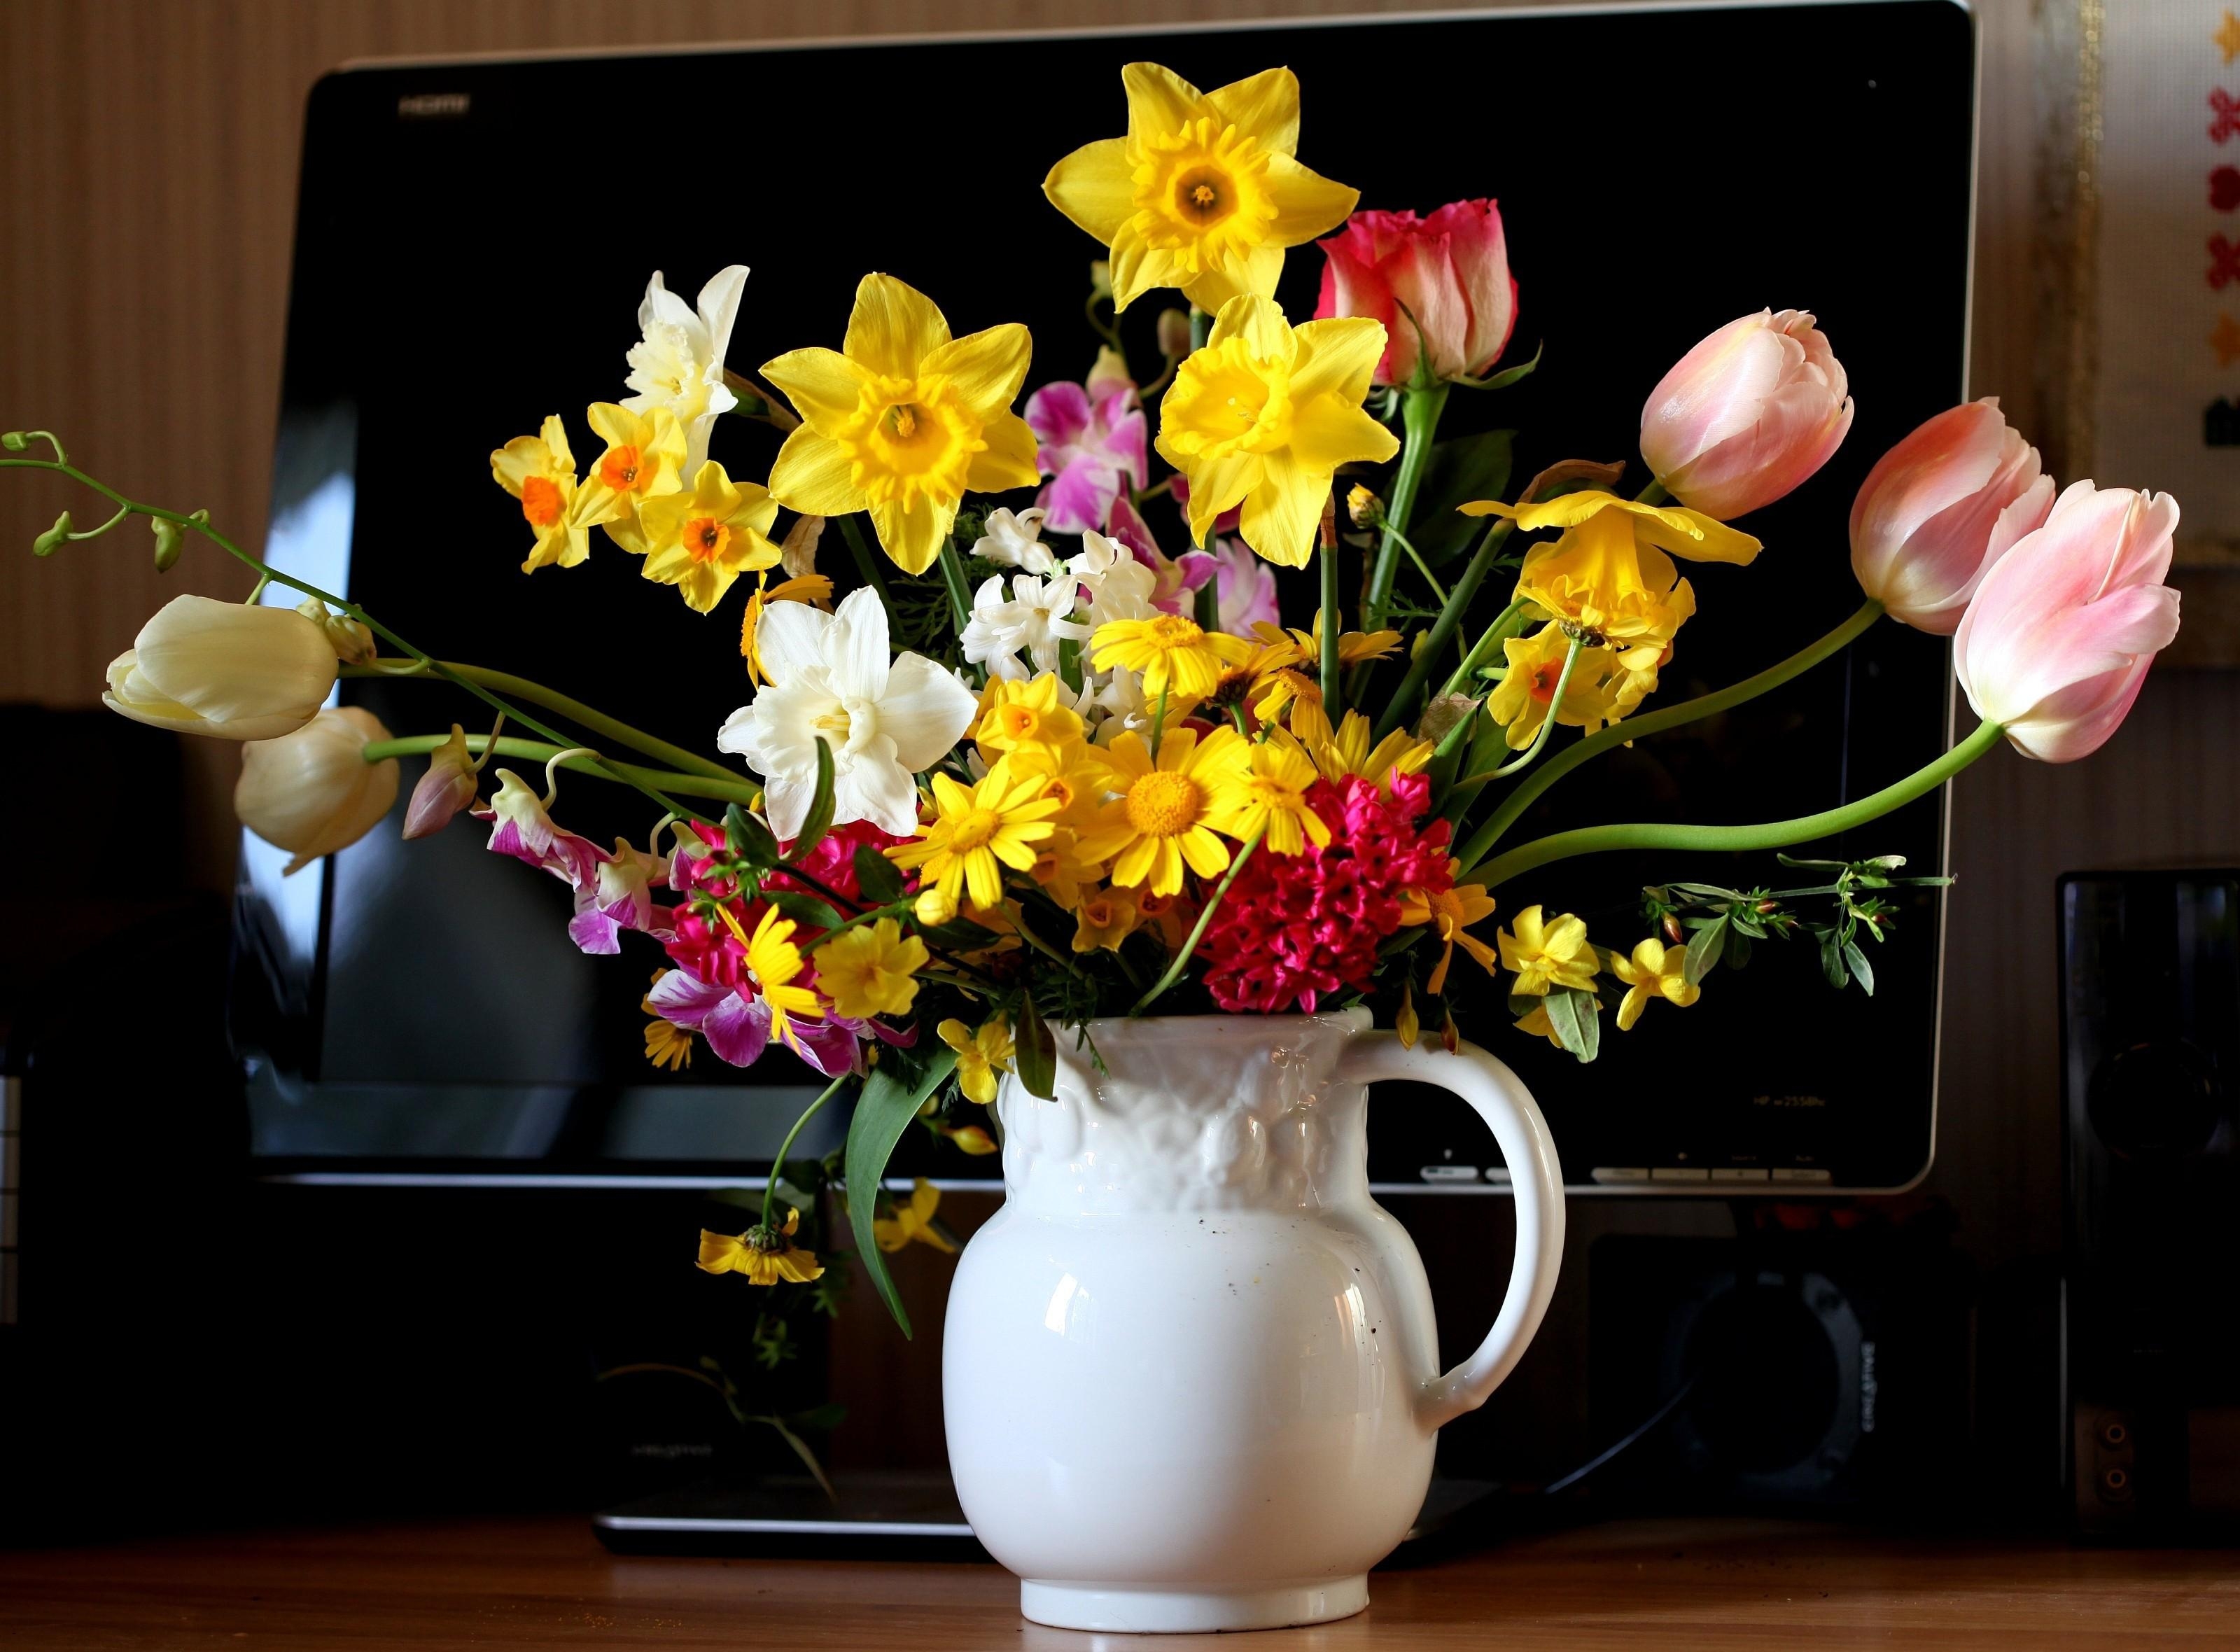 flowers, tulips, narcissussi, hyacinth, bouquet, jug, monitor iphone wallpaper